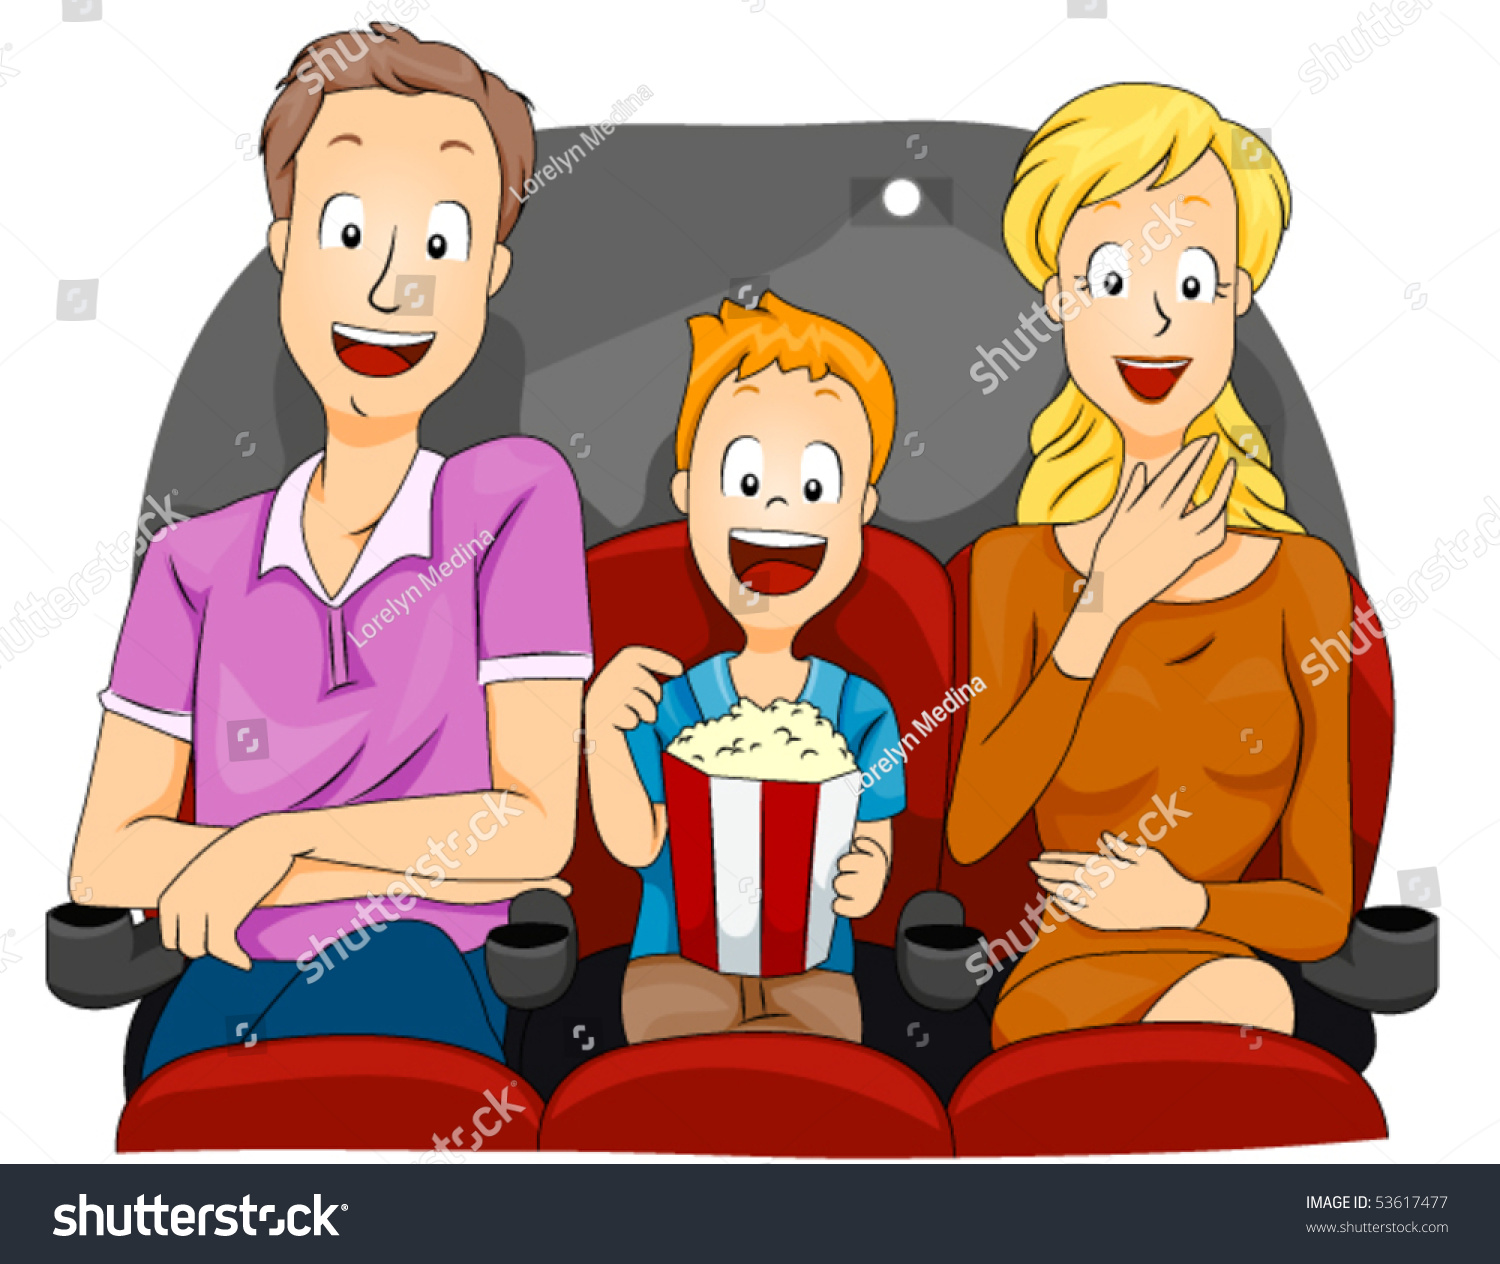 clipart watching movies - photo #10